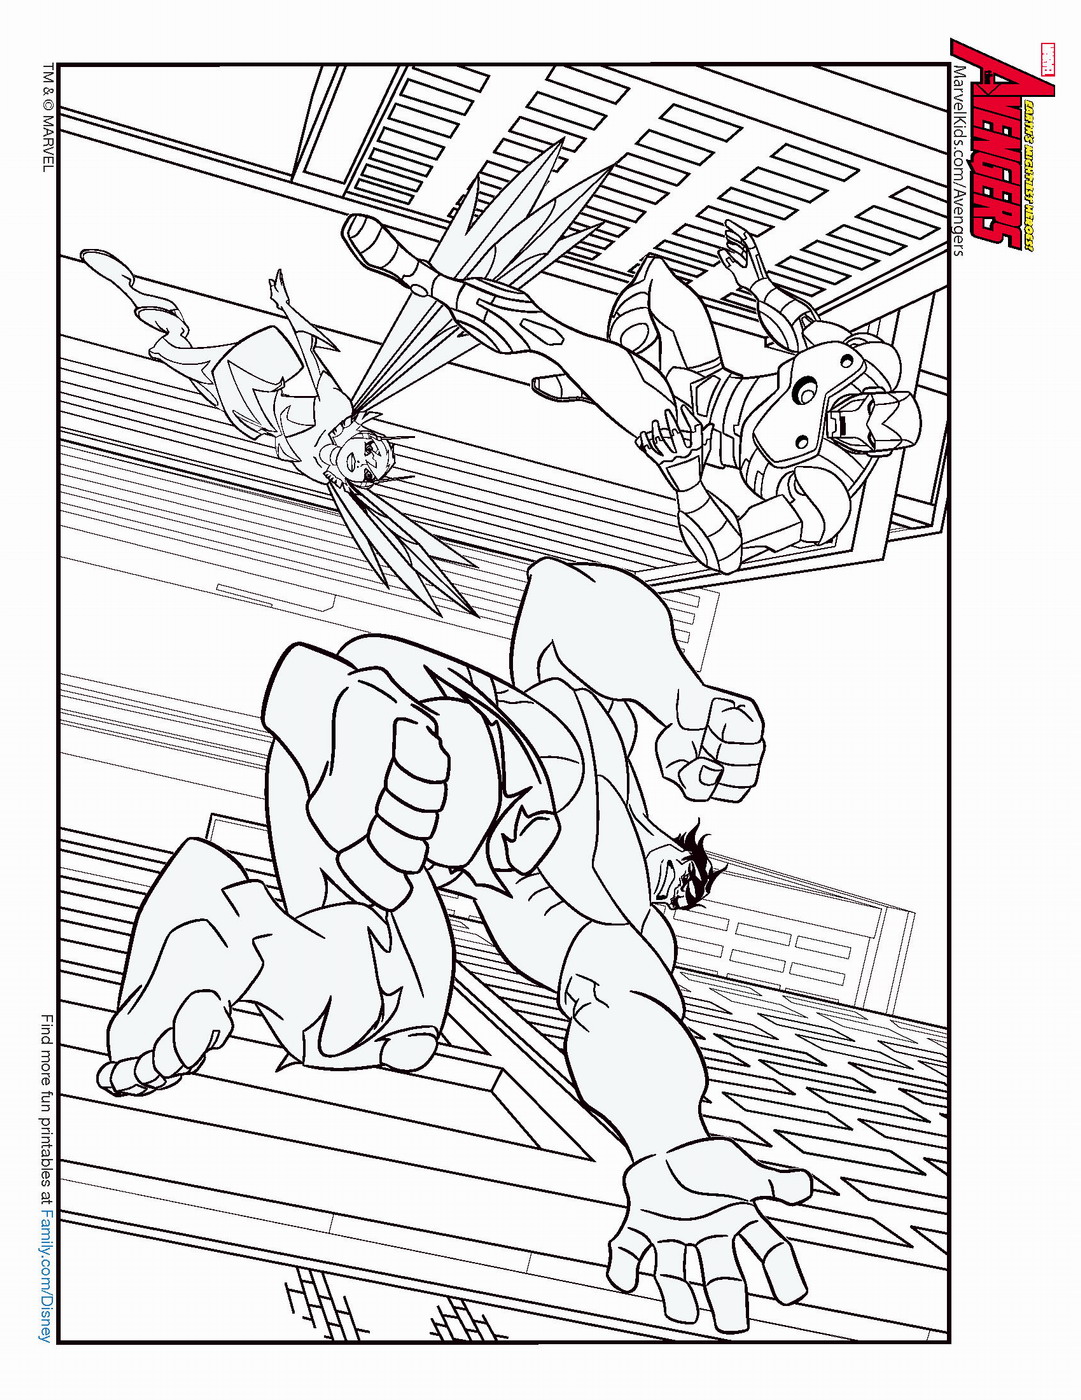 The Avengers Coloring Pages